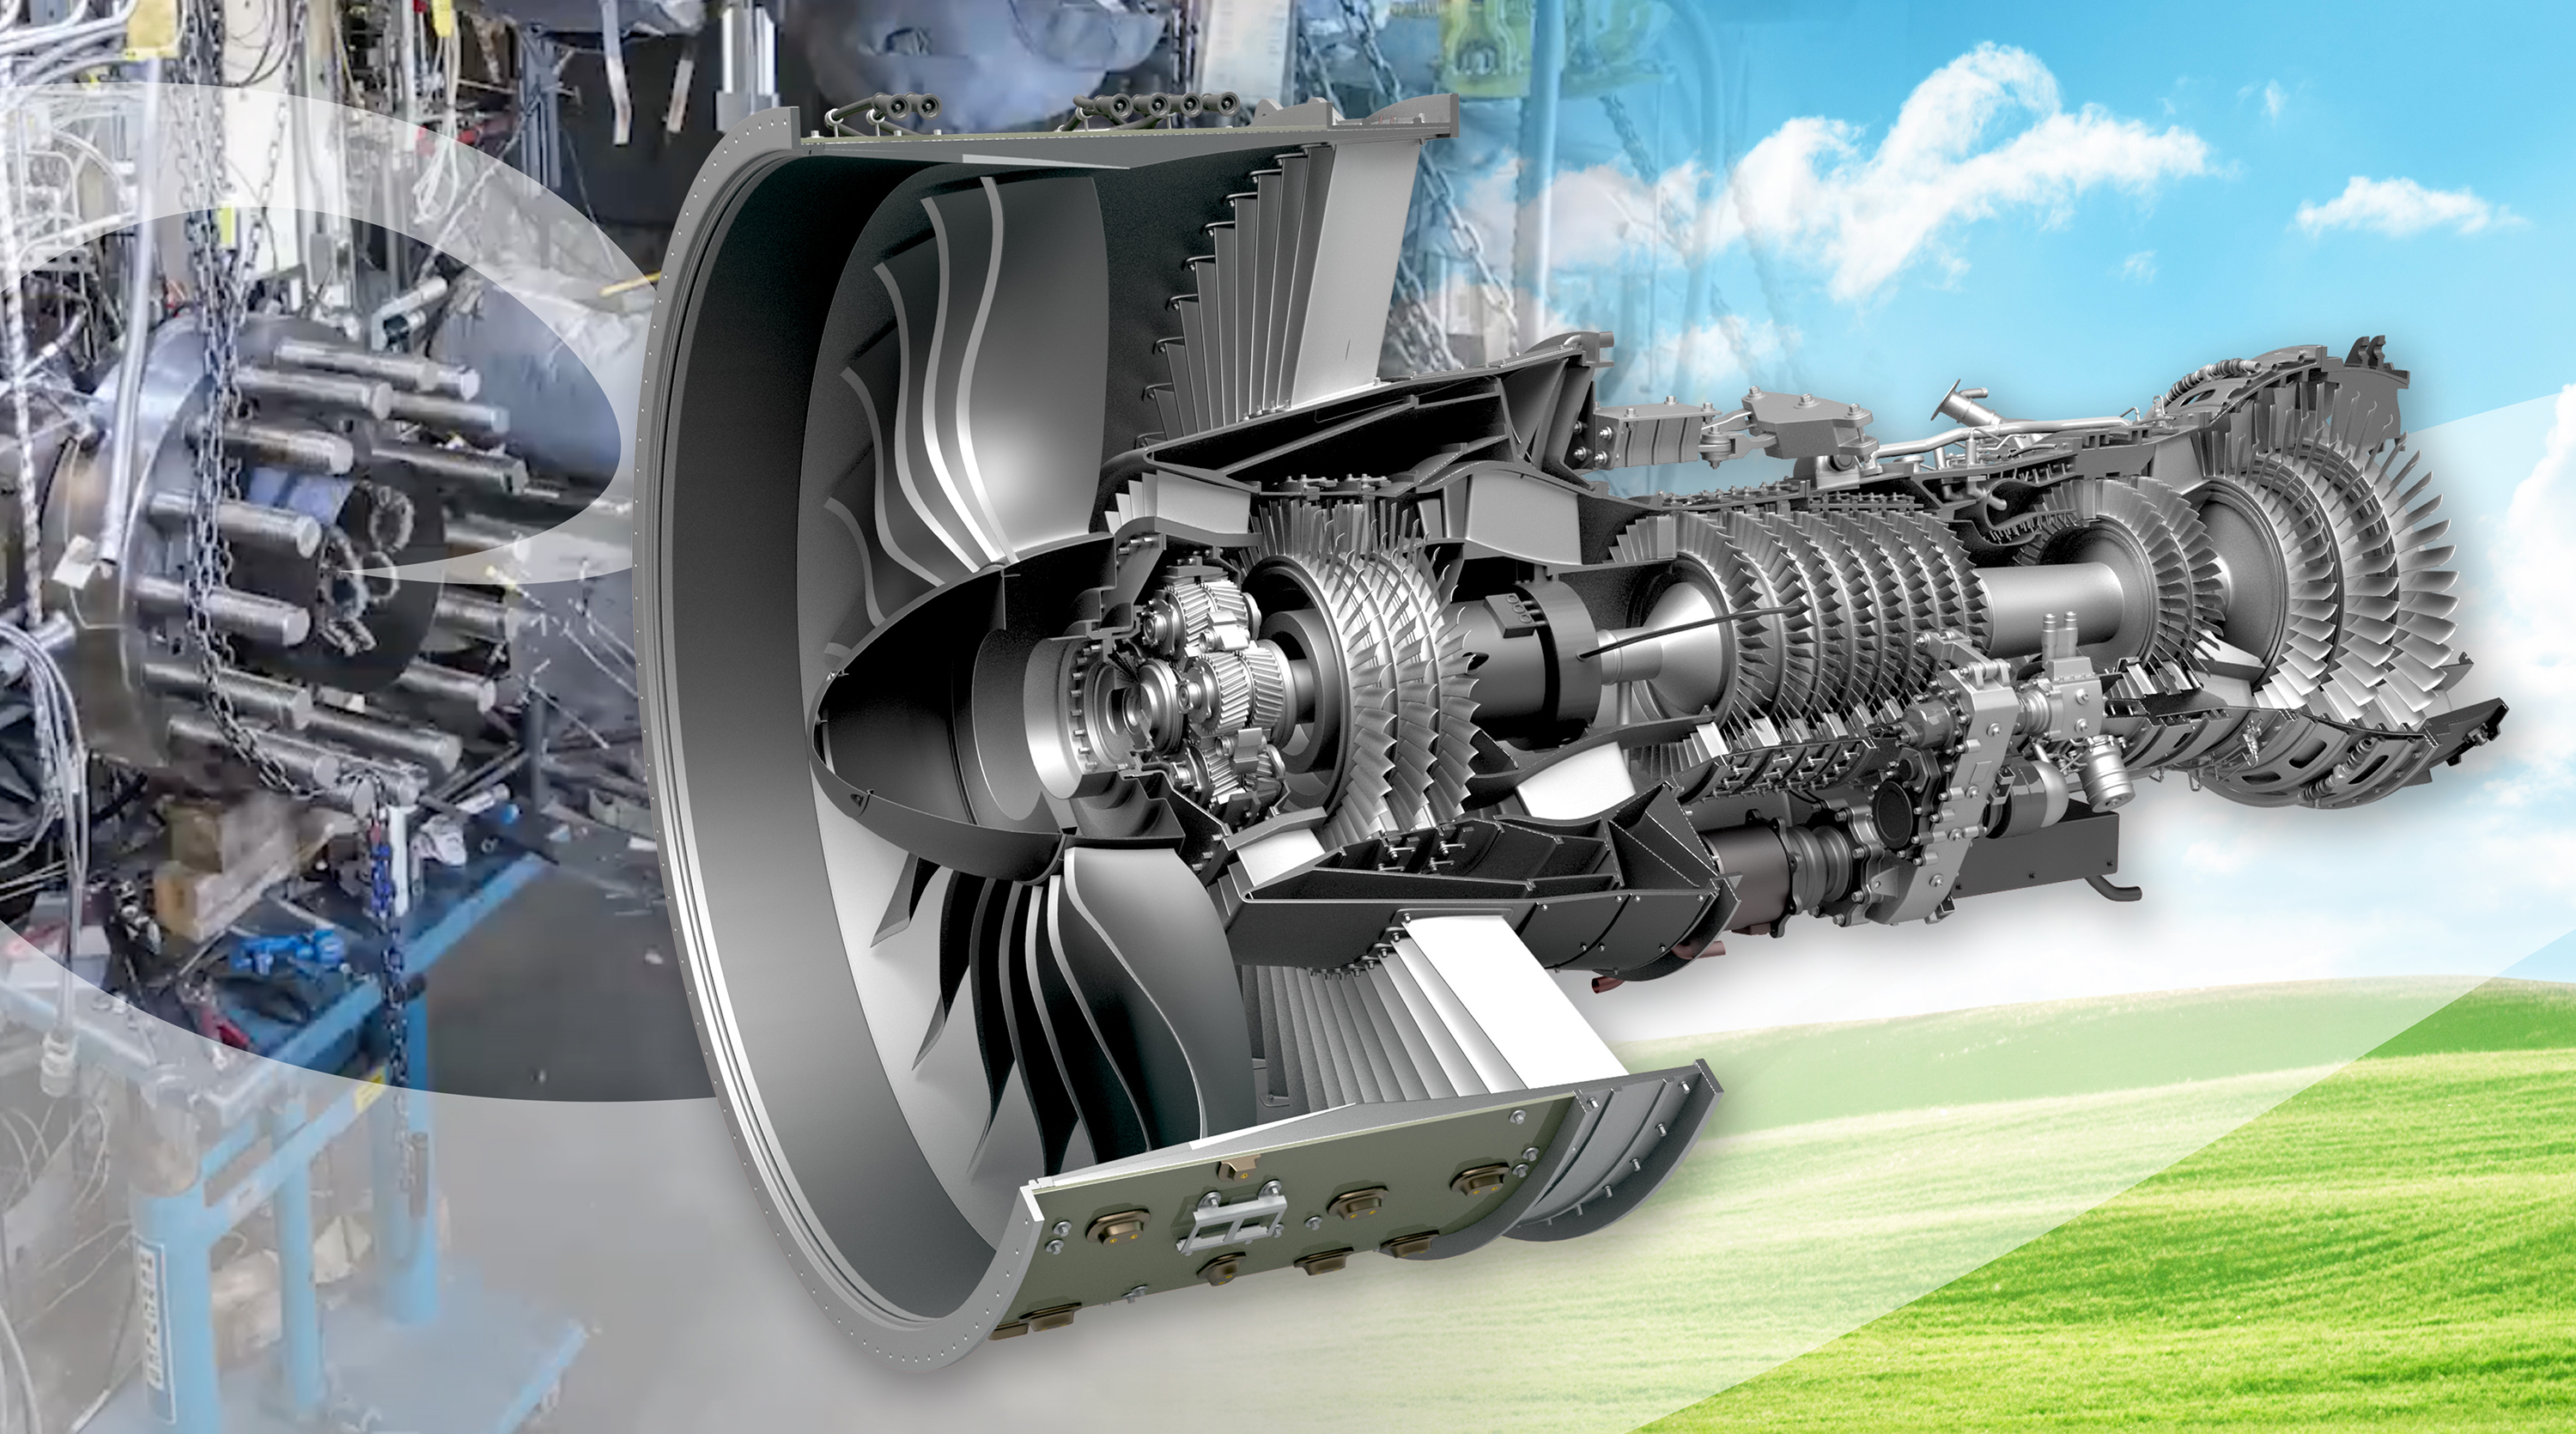 NASA, Industry Advance Jet Engines and Sustainable Fuel Compatibility - NASA